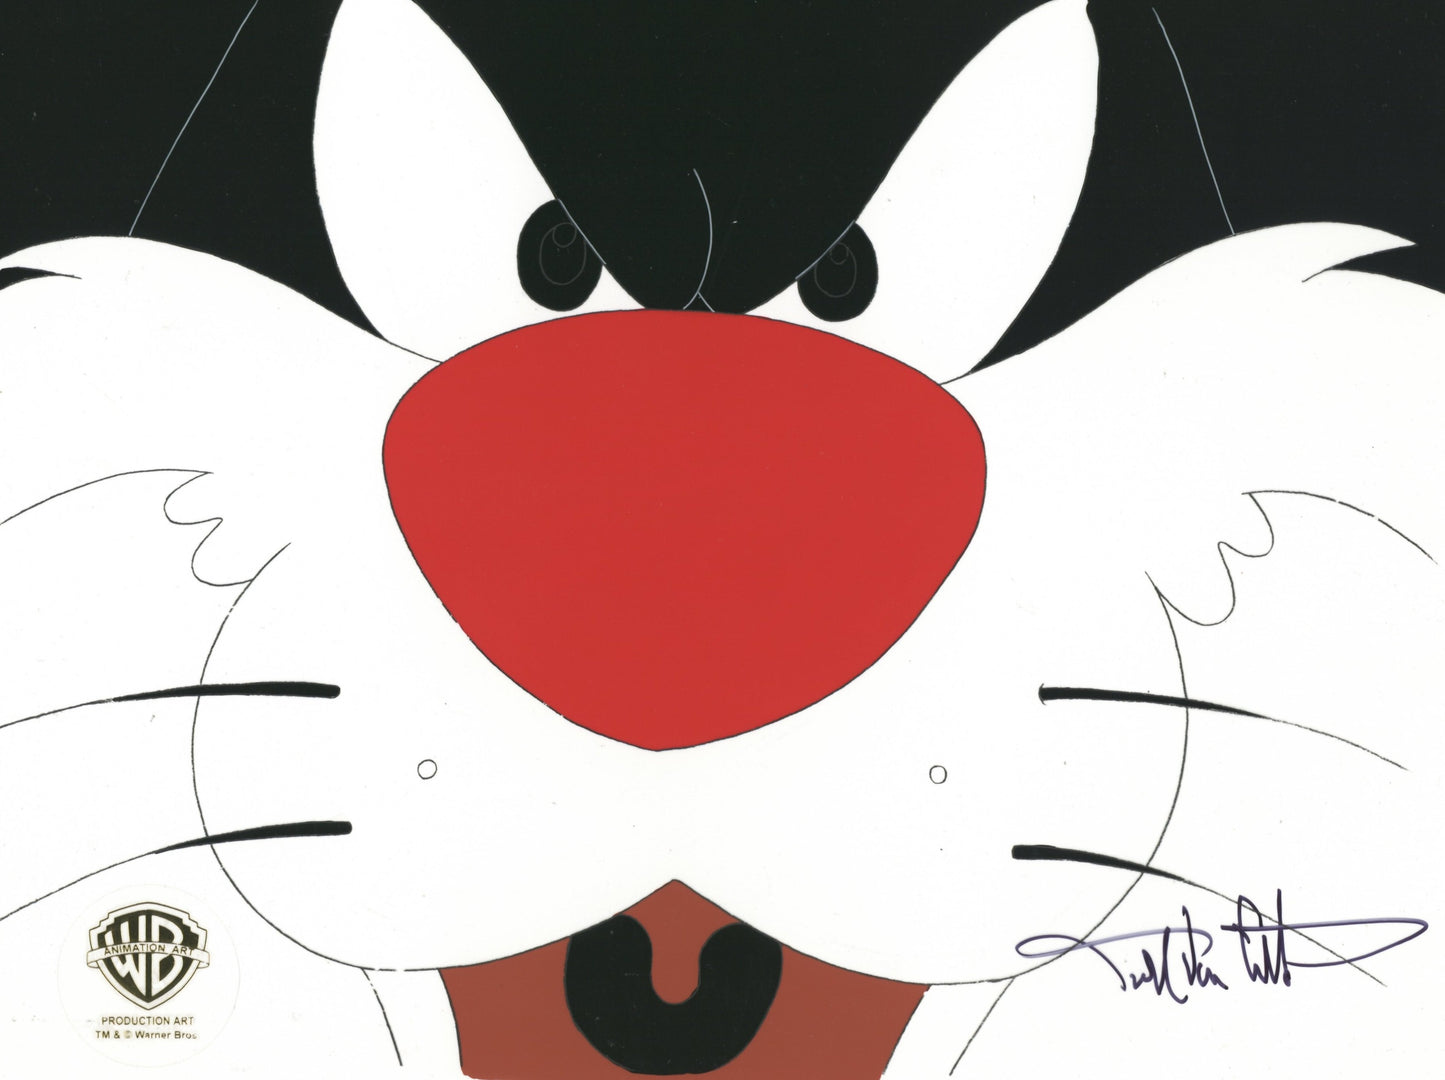 Looney Tunes Original Production Cel signed by Darrell Van Citters: Sylvester